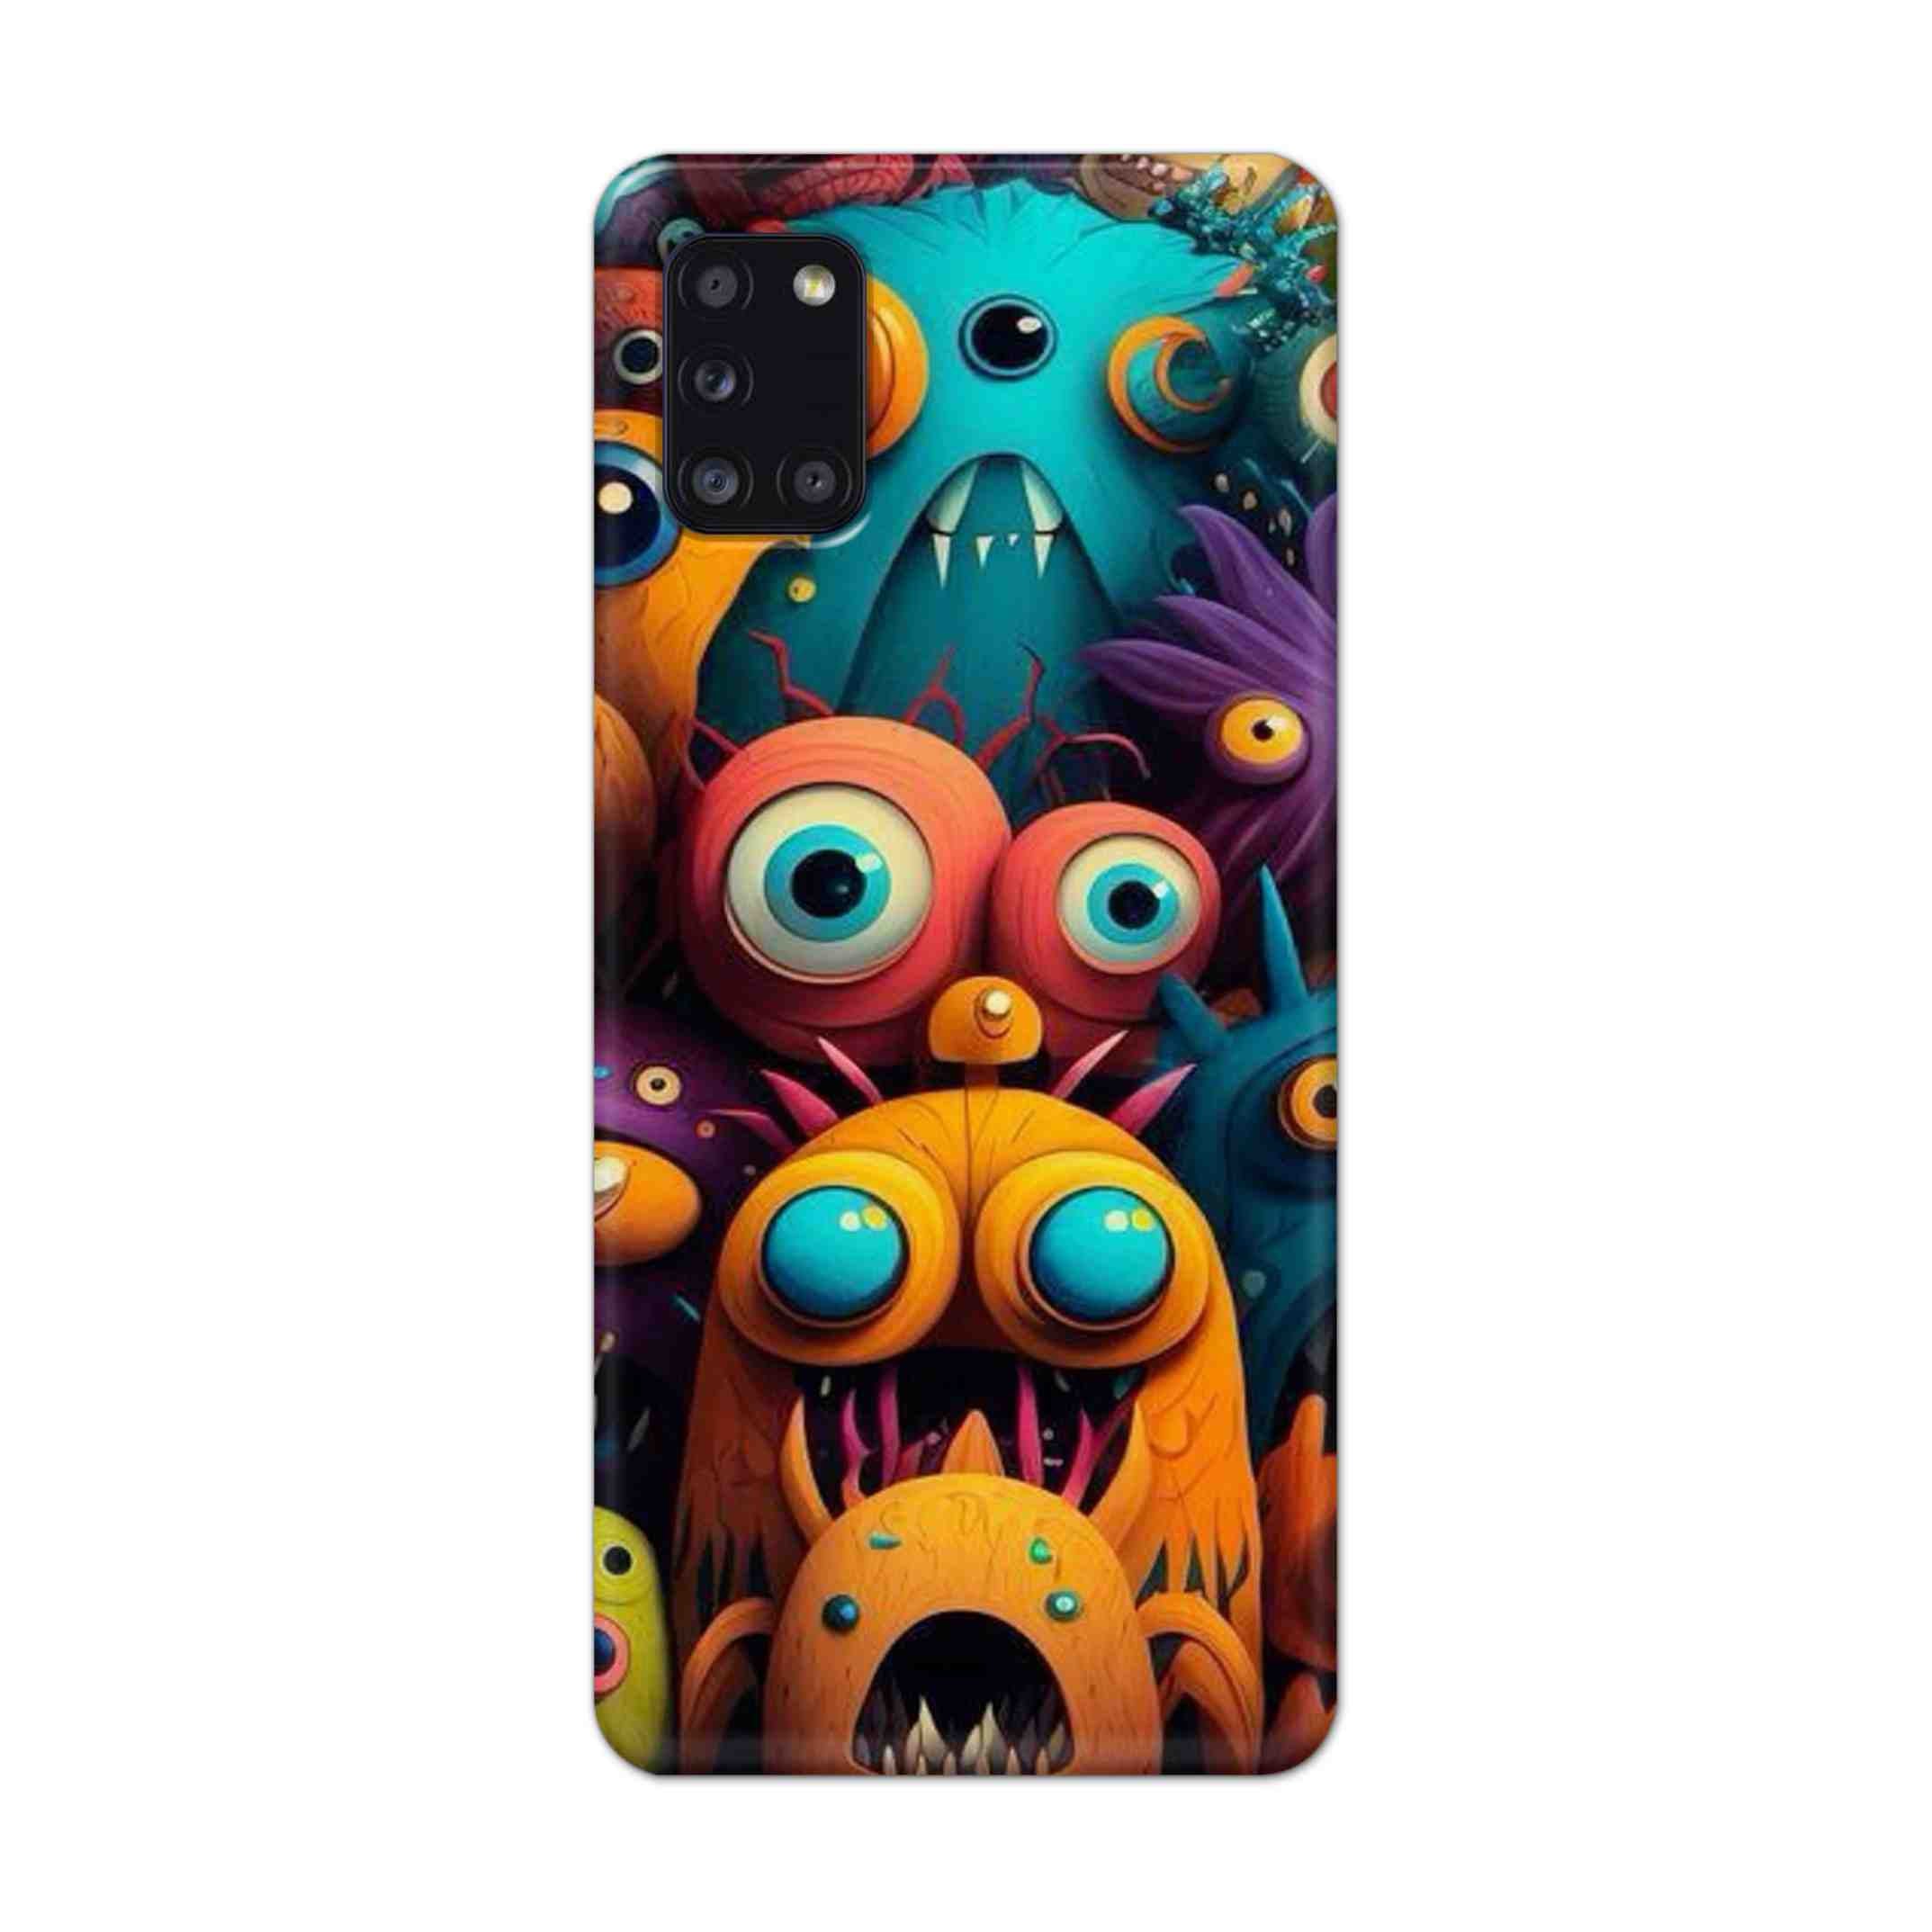 Buy Zombie Hard Back Mobile Phone Case Cover For Samsung Galaxy A31 Online